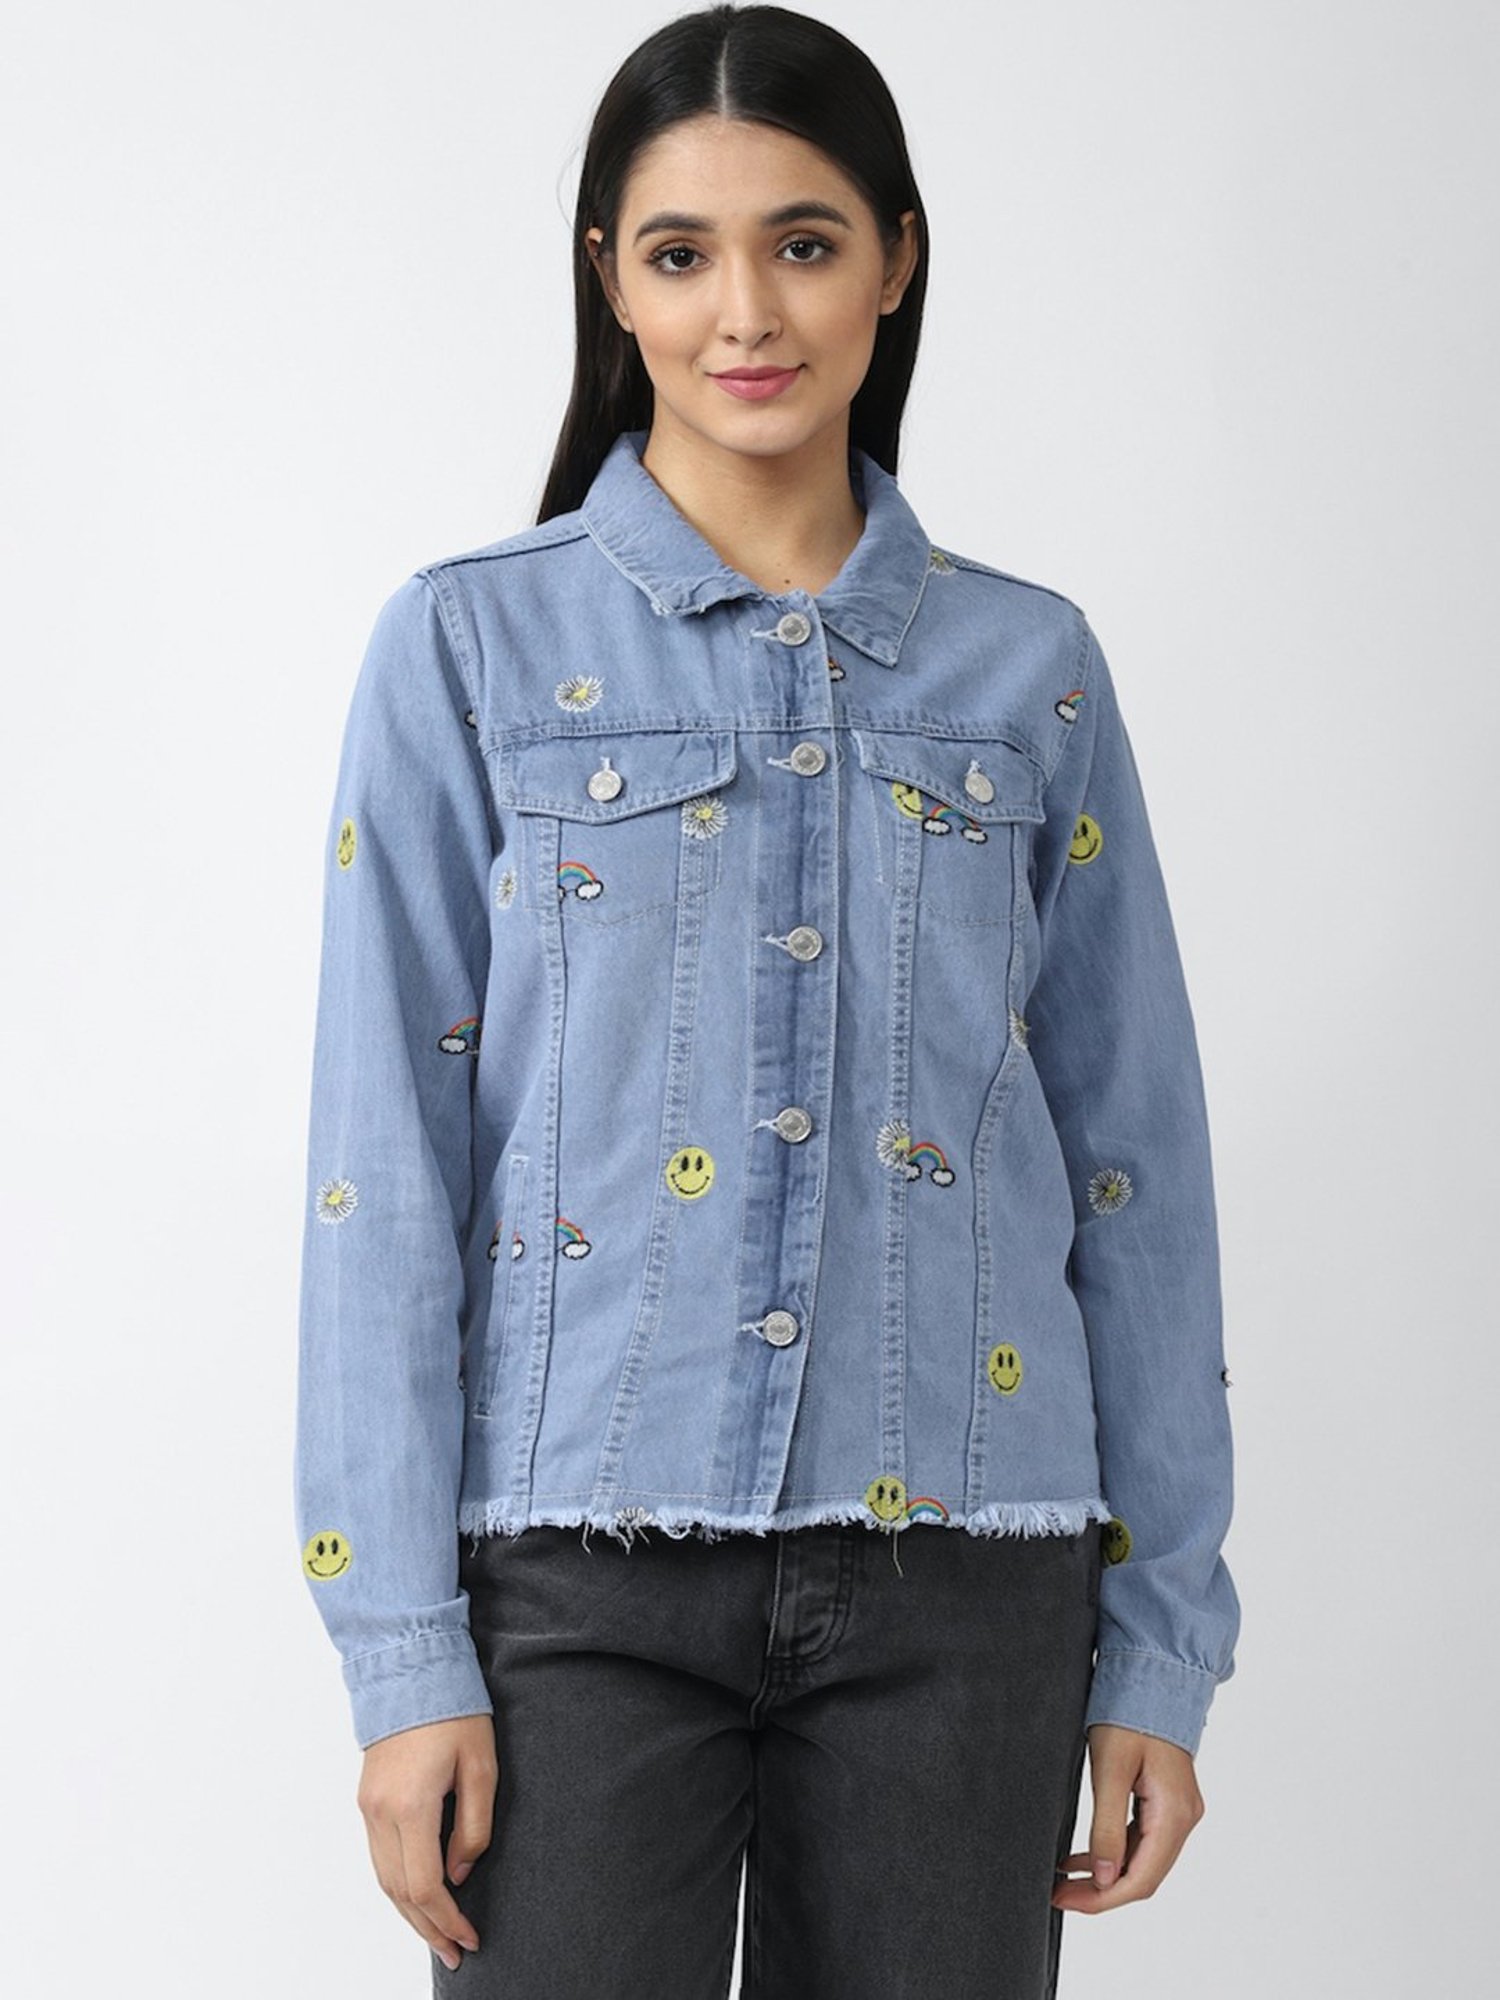 Buy Monte Carlo Distressed Washed Denim Jacket - Jackets for Women 23976658  | Myntra